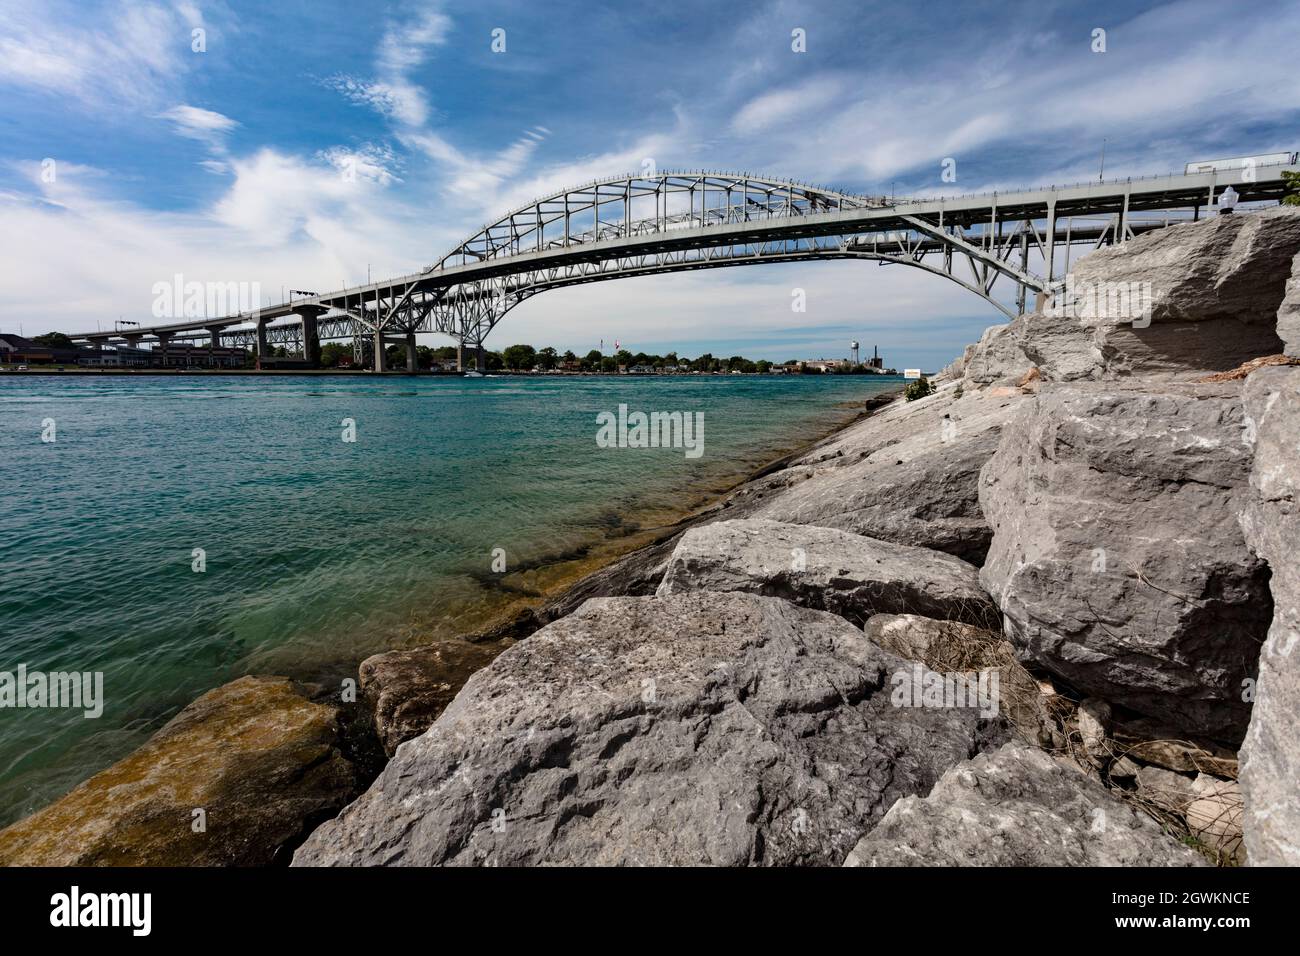 The Bluewater Bridge connects Canada (at Ontario) to the U.S. (at Michigan). Stock Photo